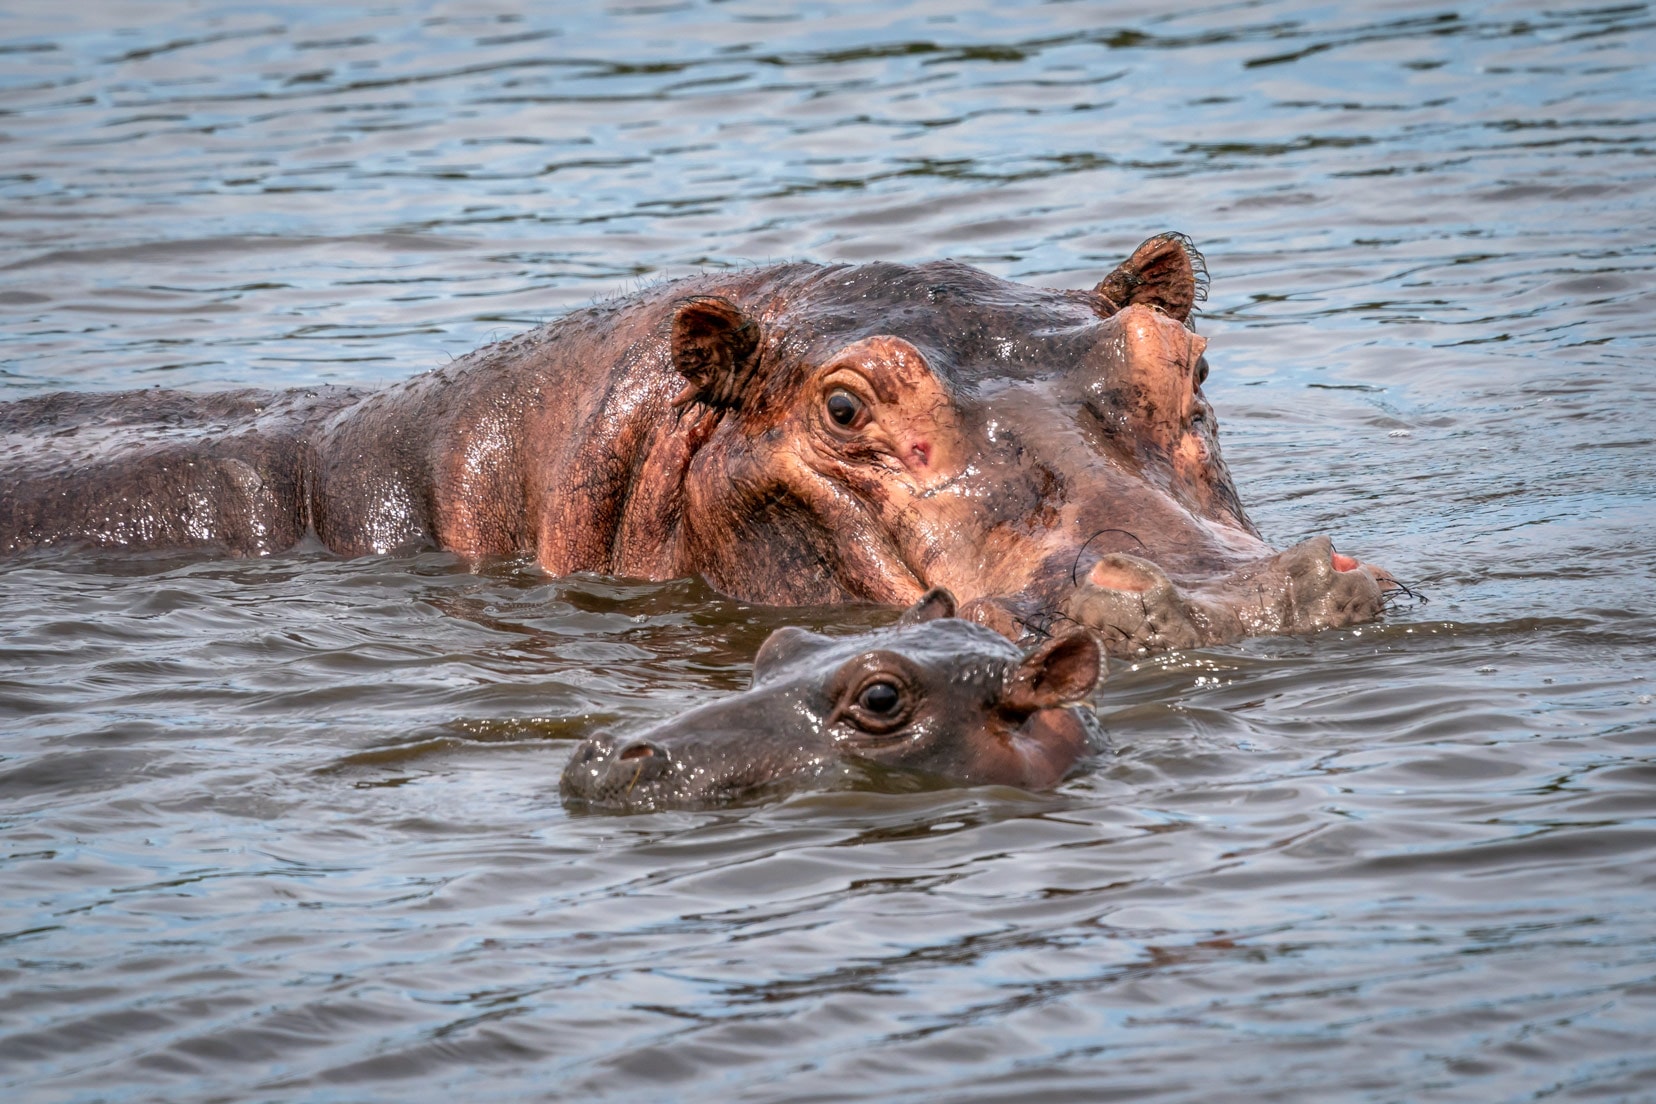 Large hippo in water with head showing with a smaller head of a baby hippo beside it